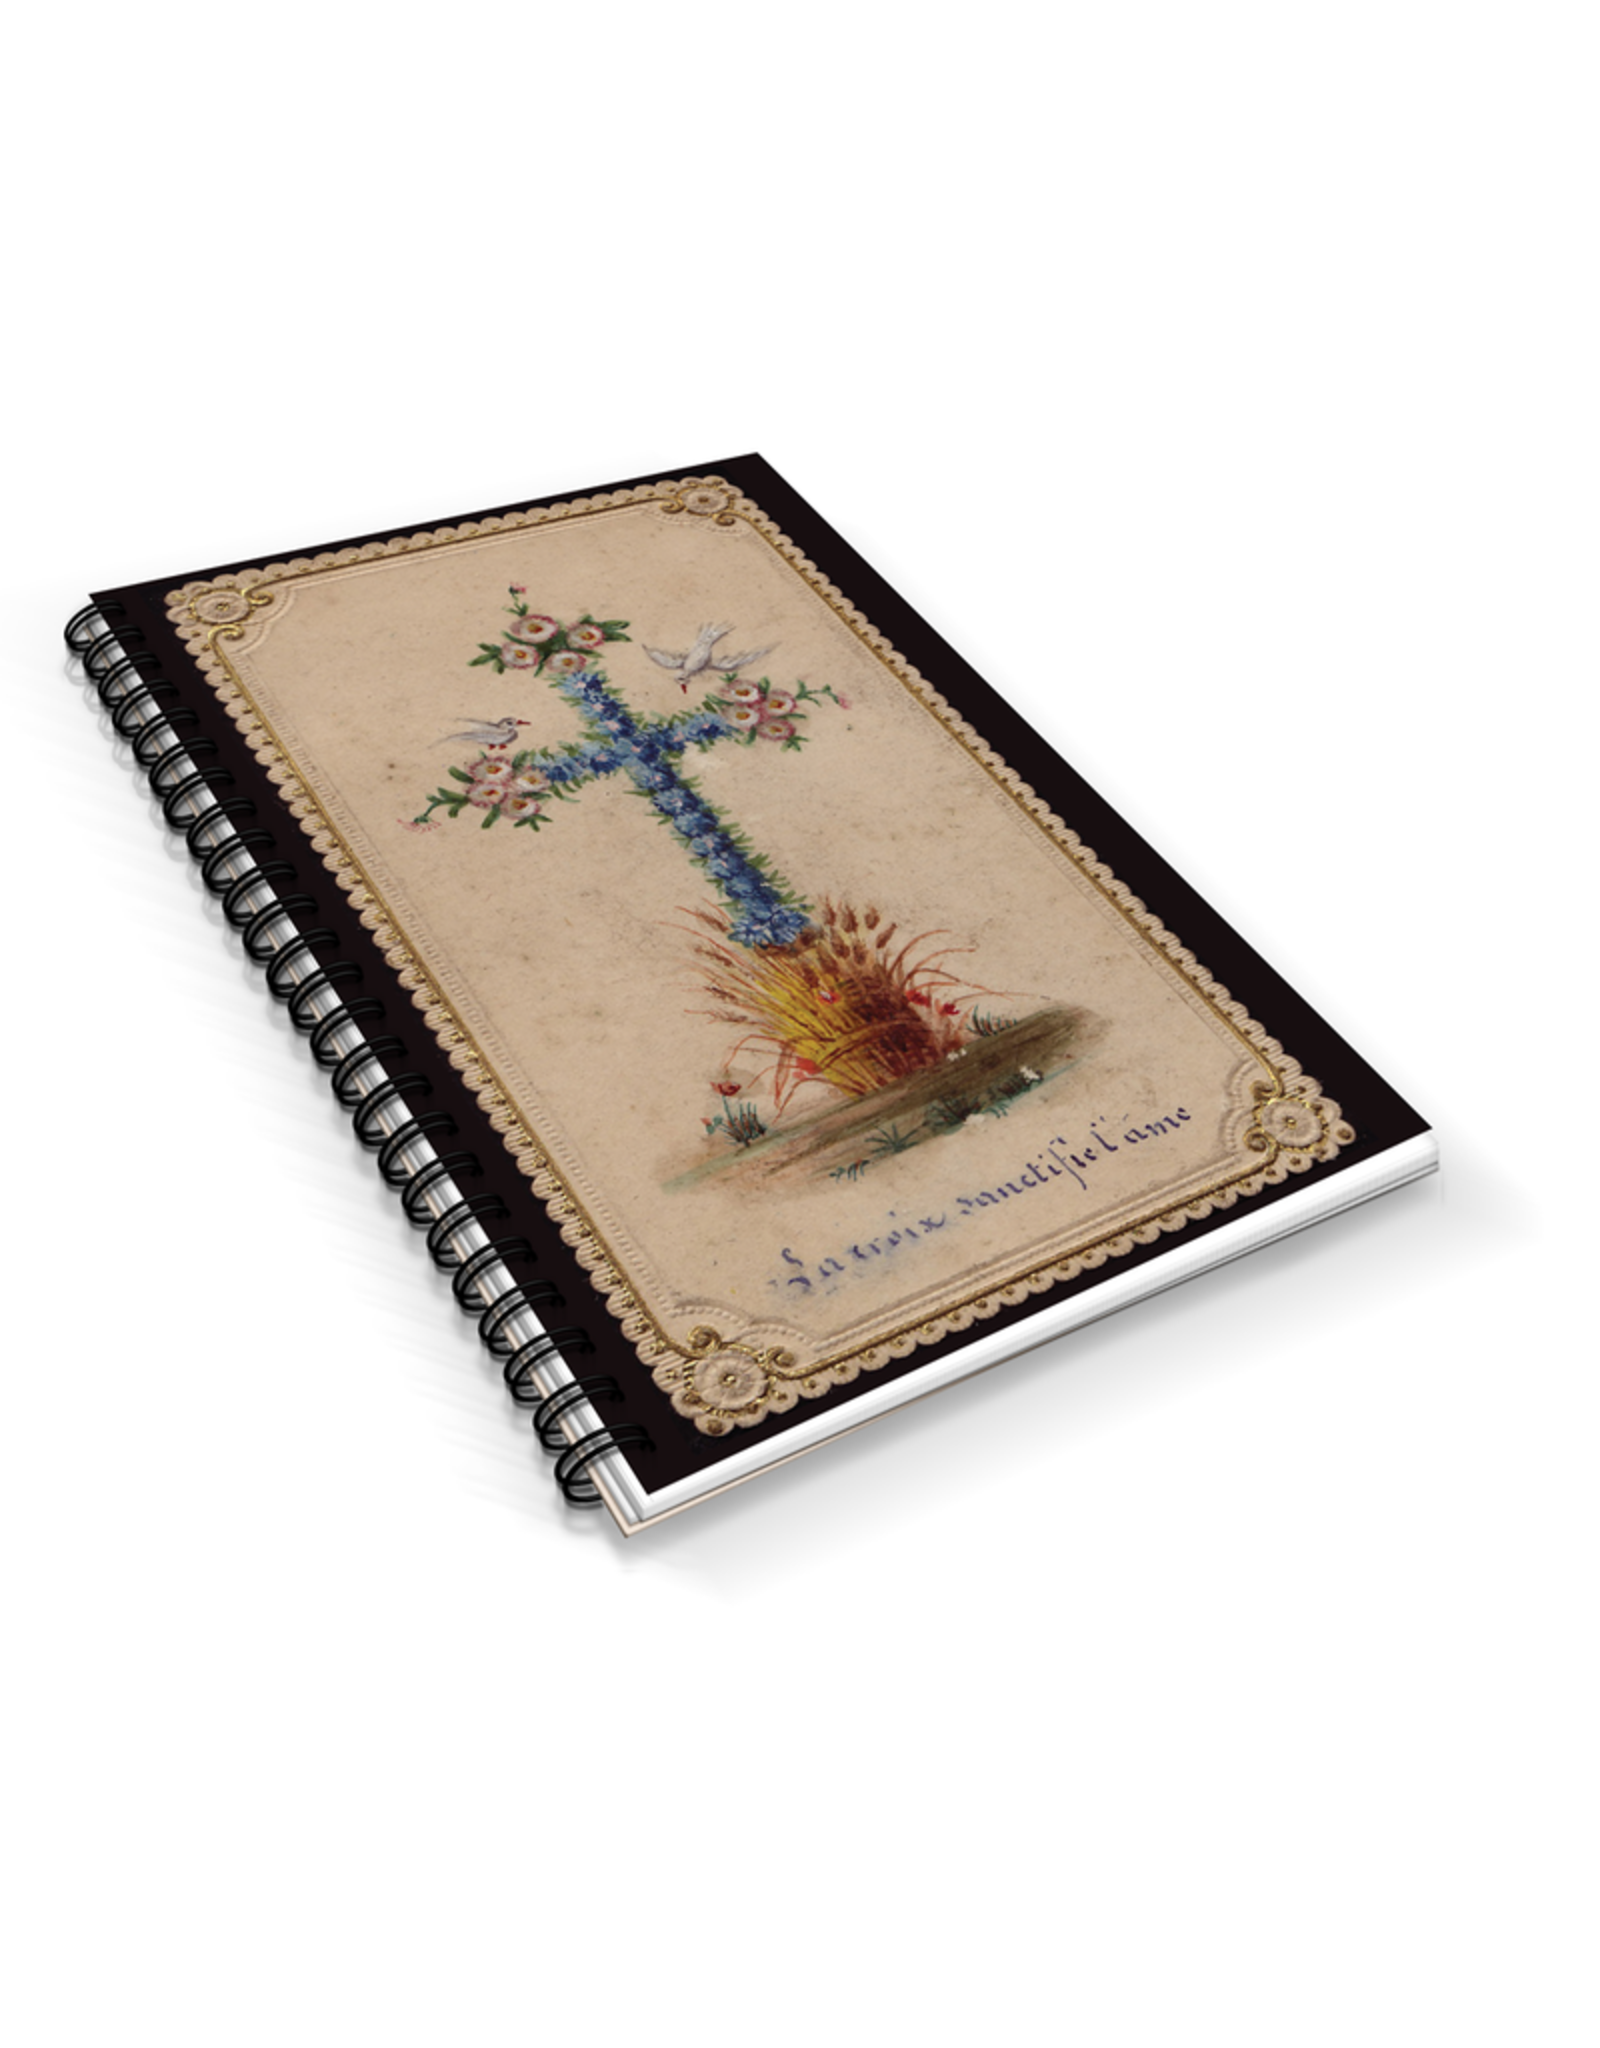 Full of Grace Journal, Spiral - The Cross Sanctifies the Soul